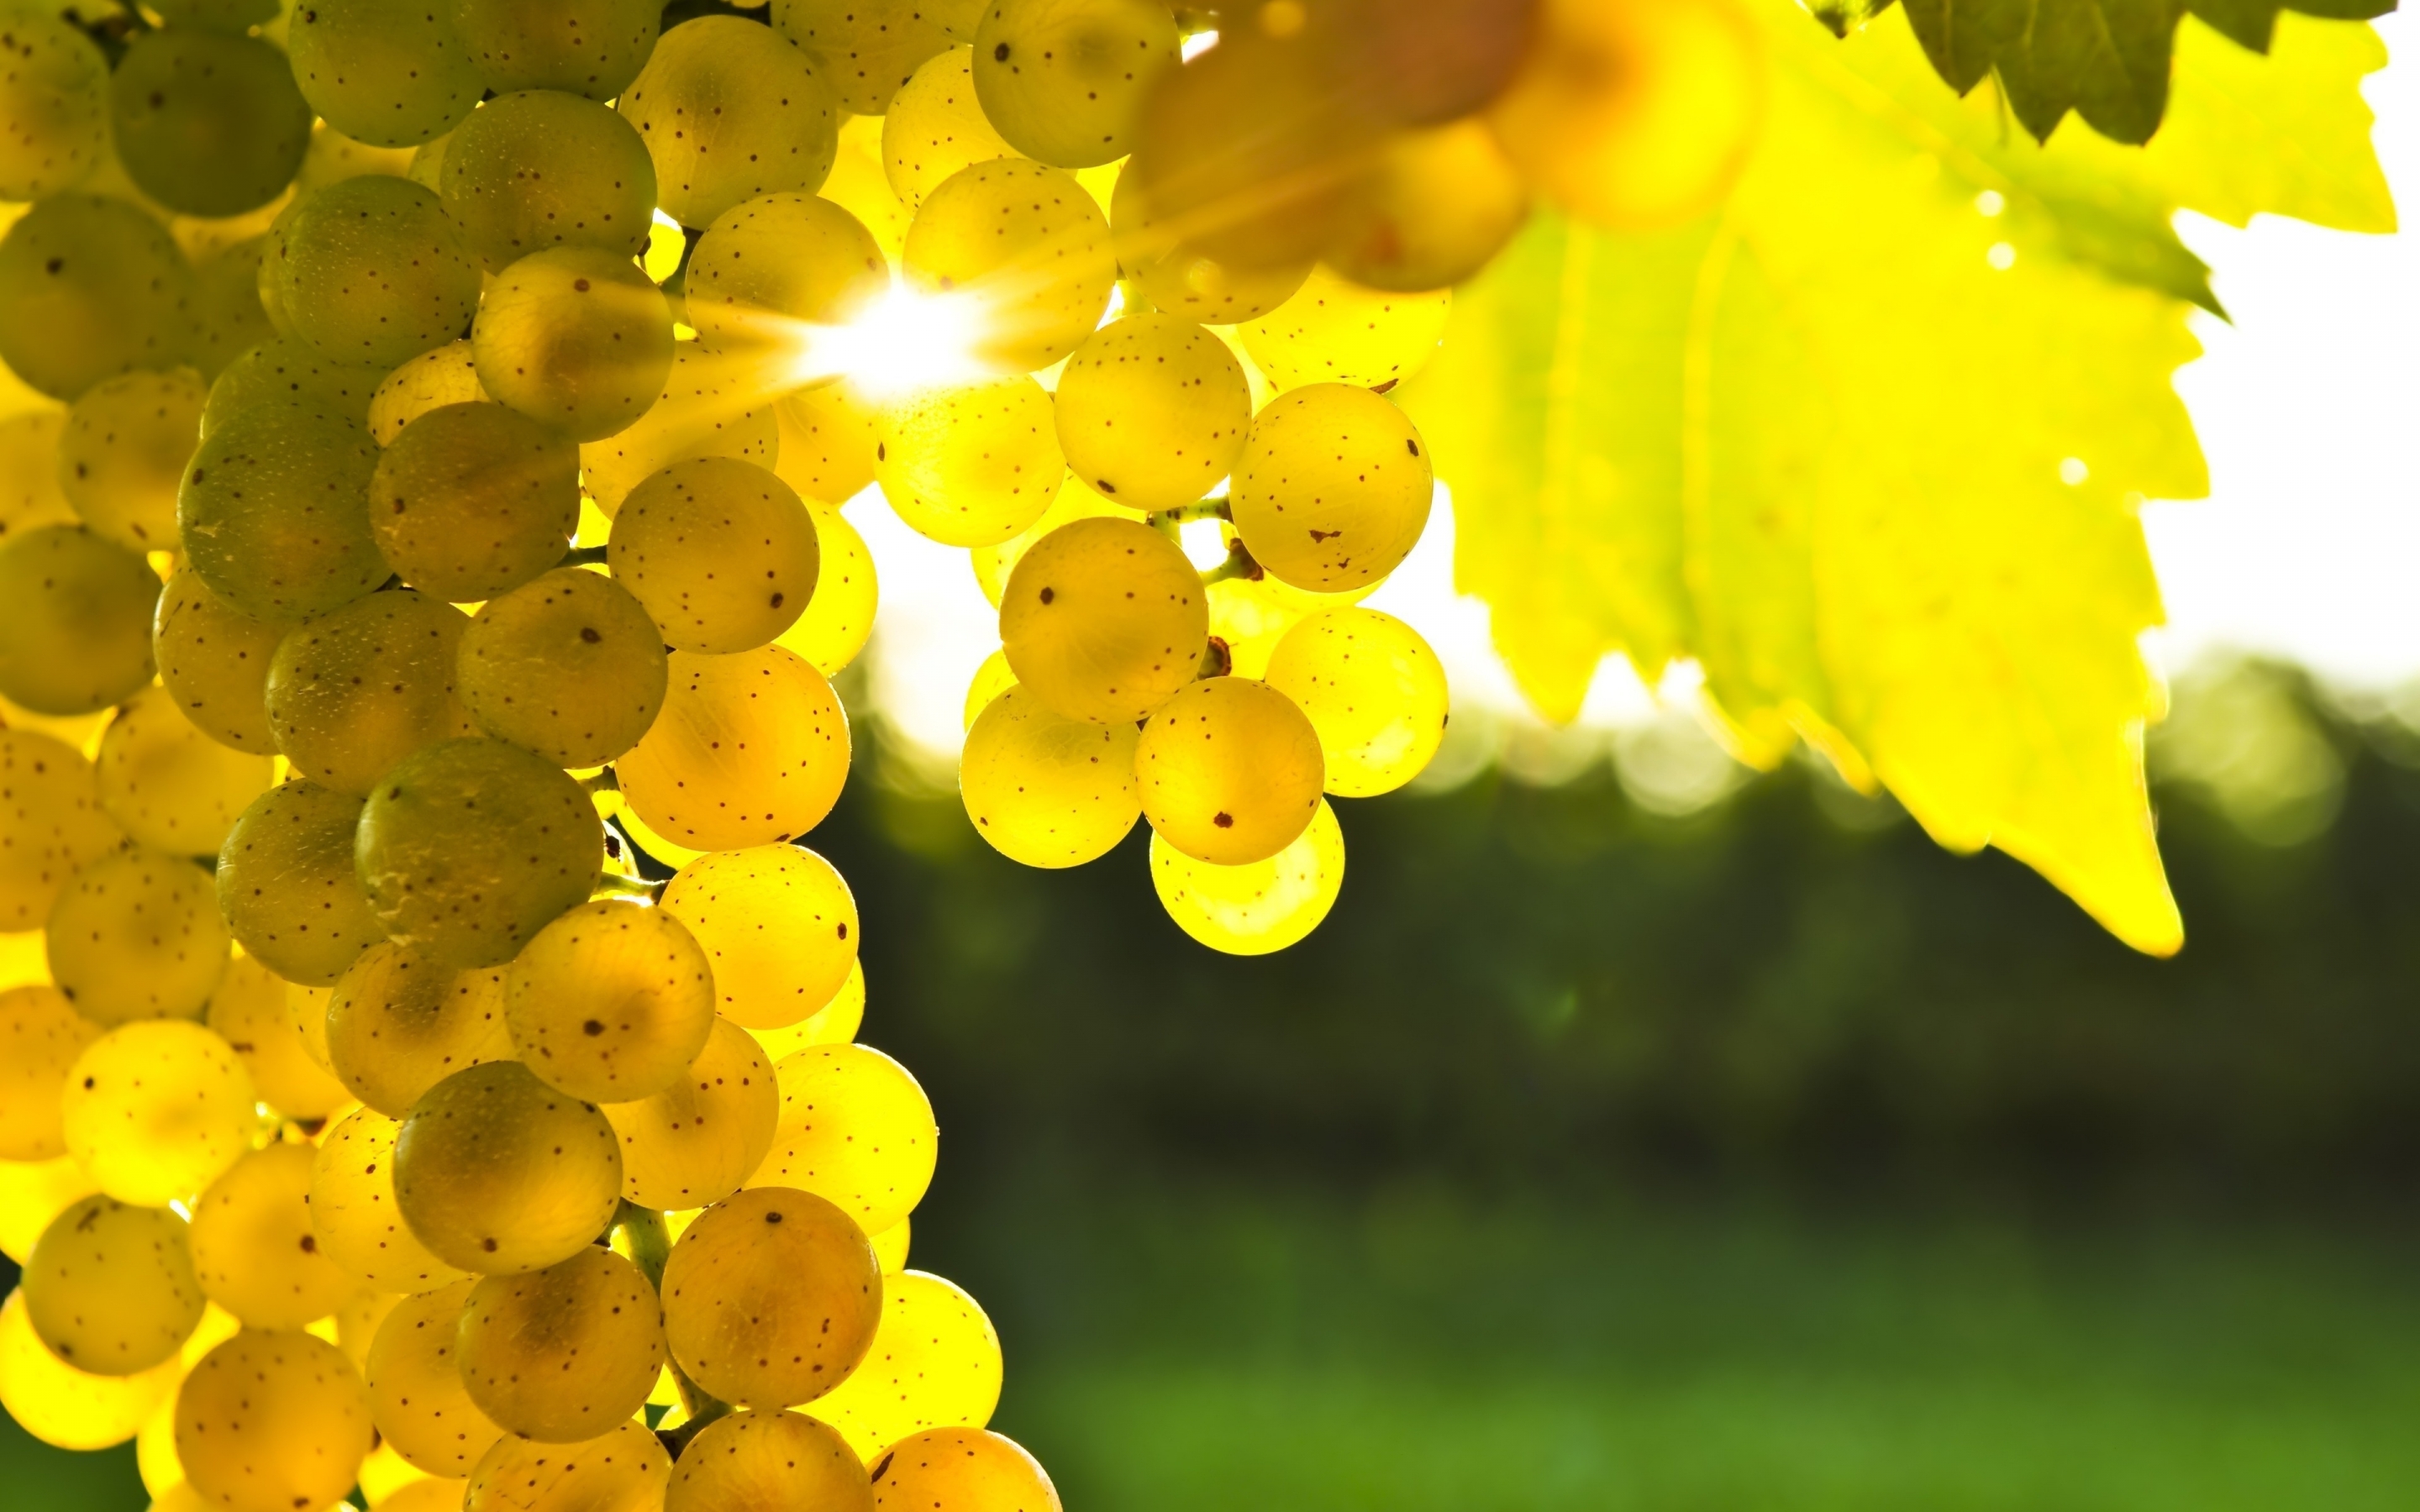 Golden Grapes for 2880 x 1800 Retina Display resolution